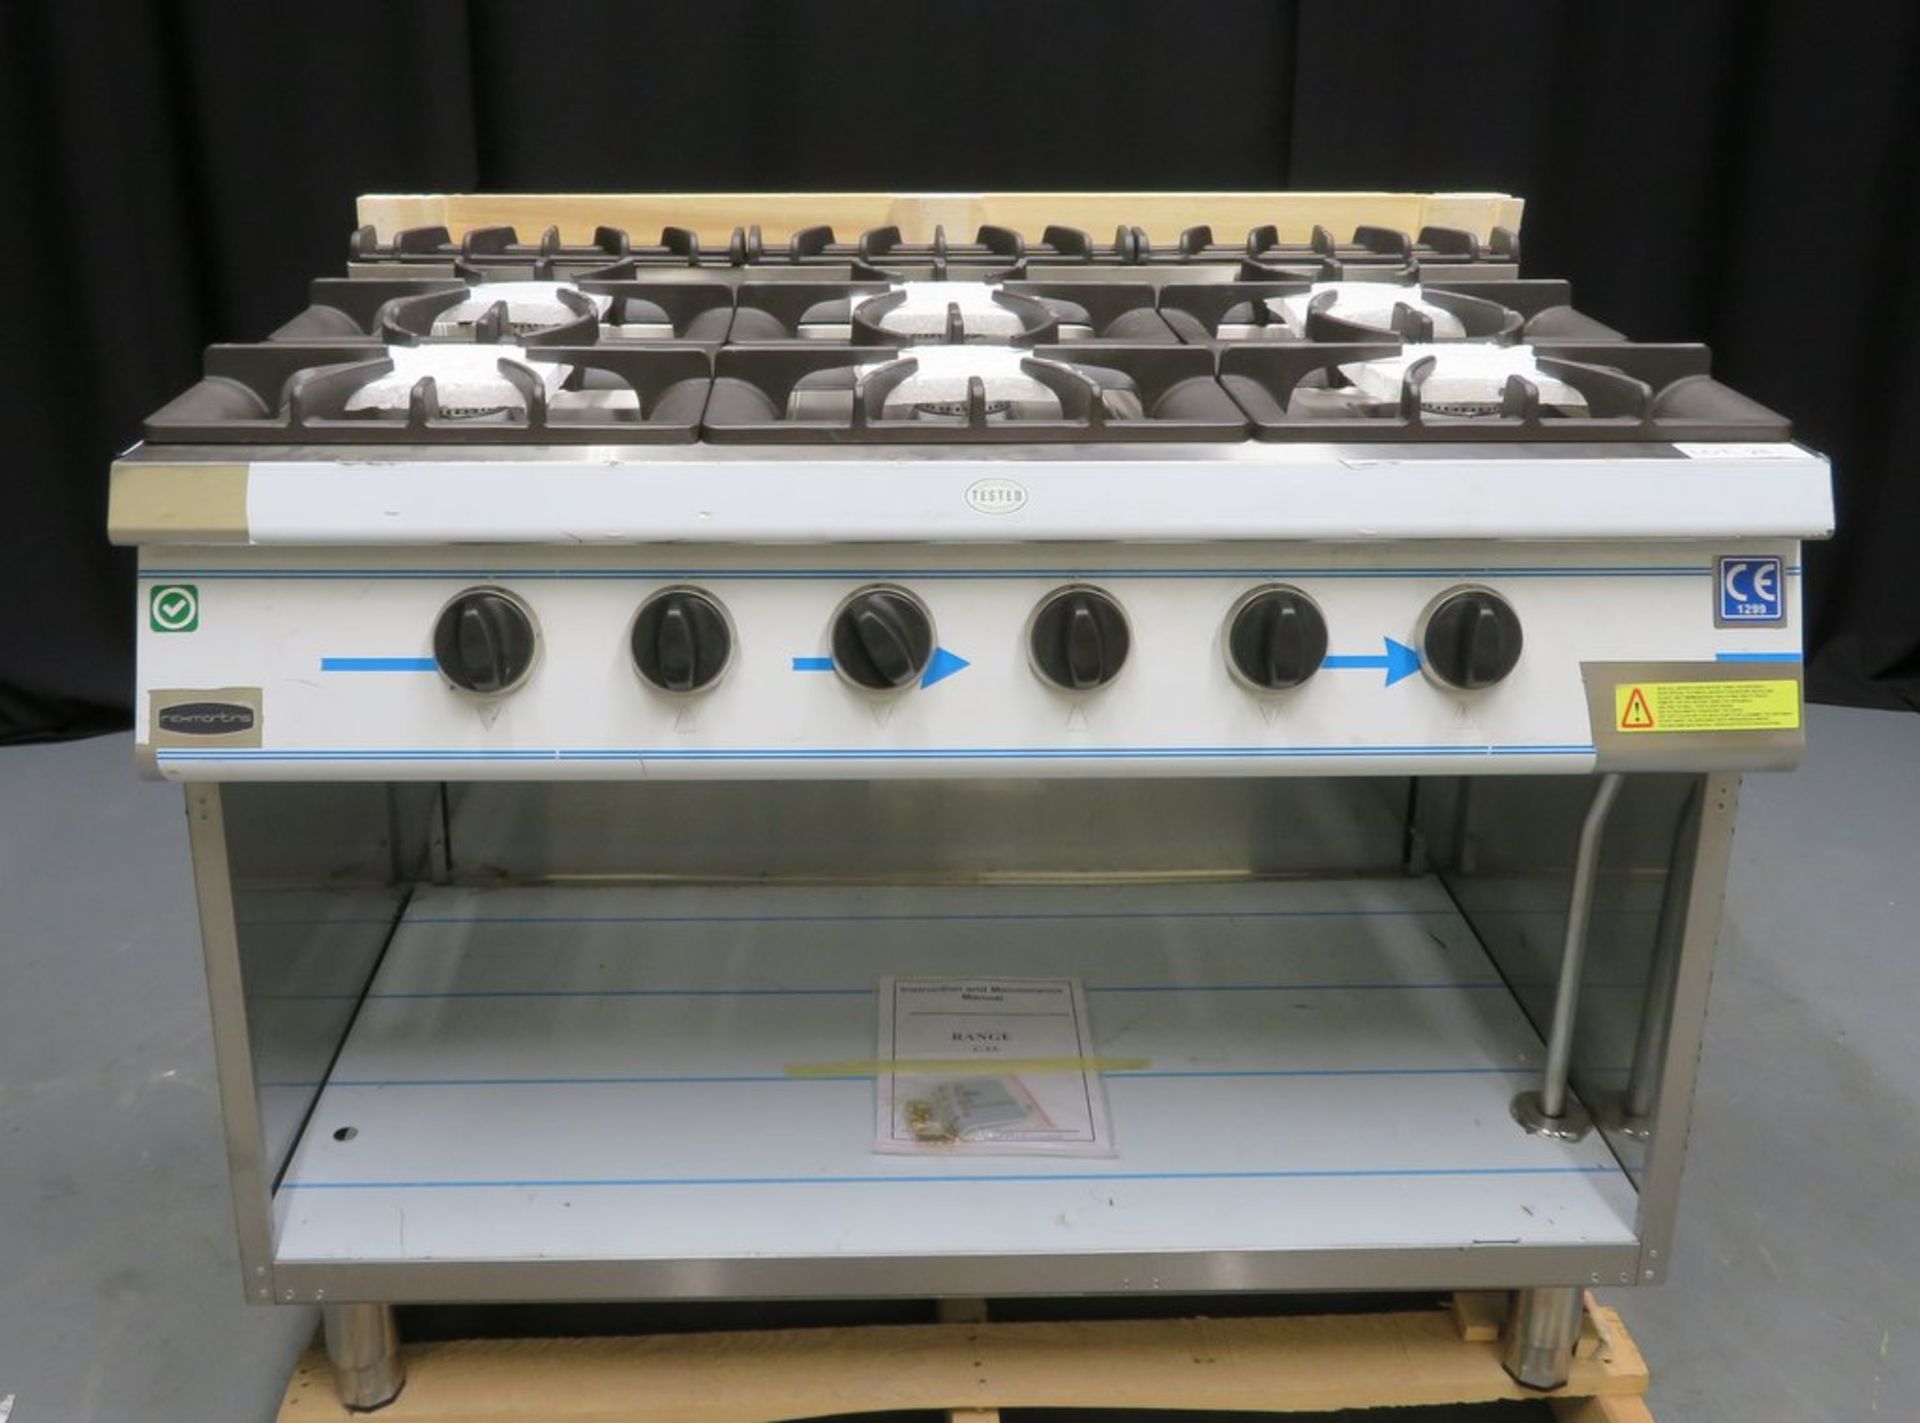 Heavy duty 6 burner boiling top, model G7K201G, gas, brand new & boxed - Image 2 of 10